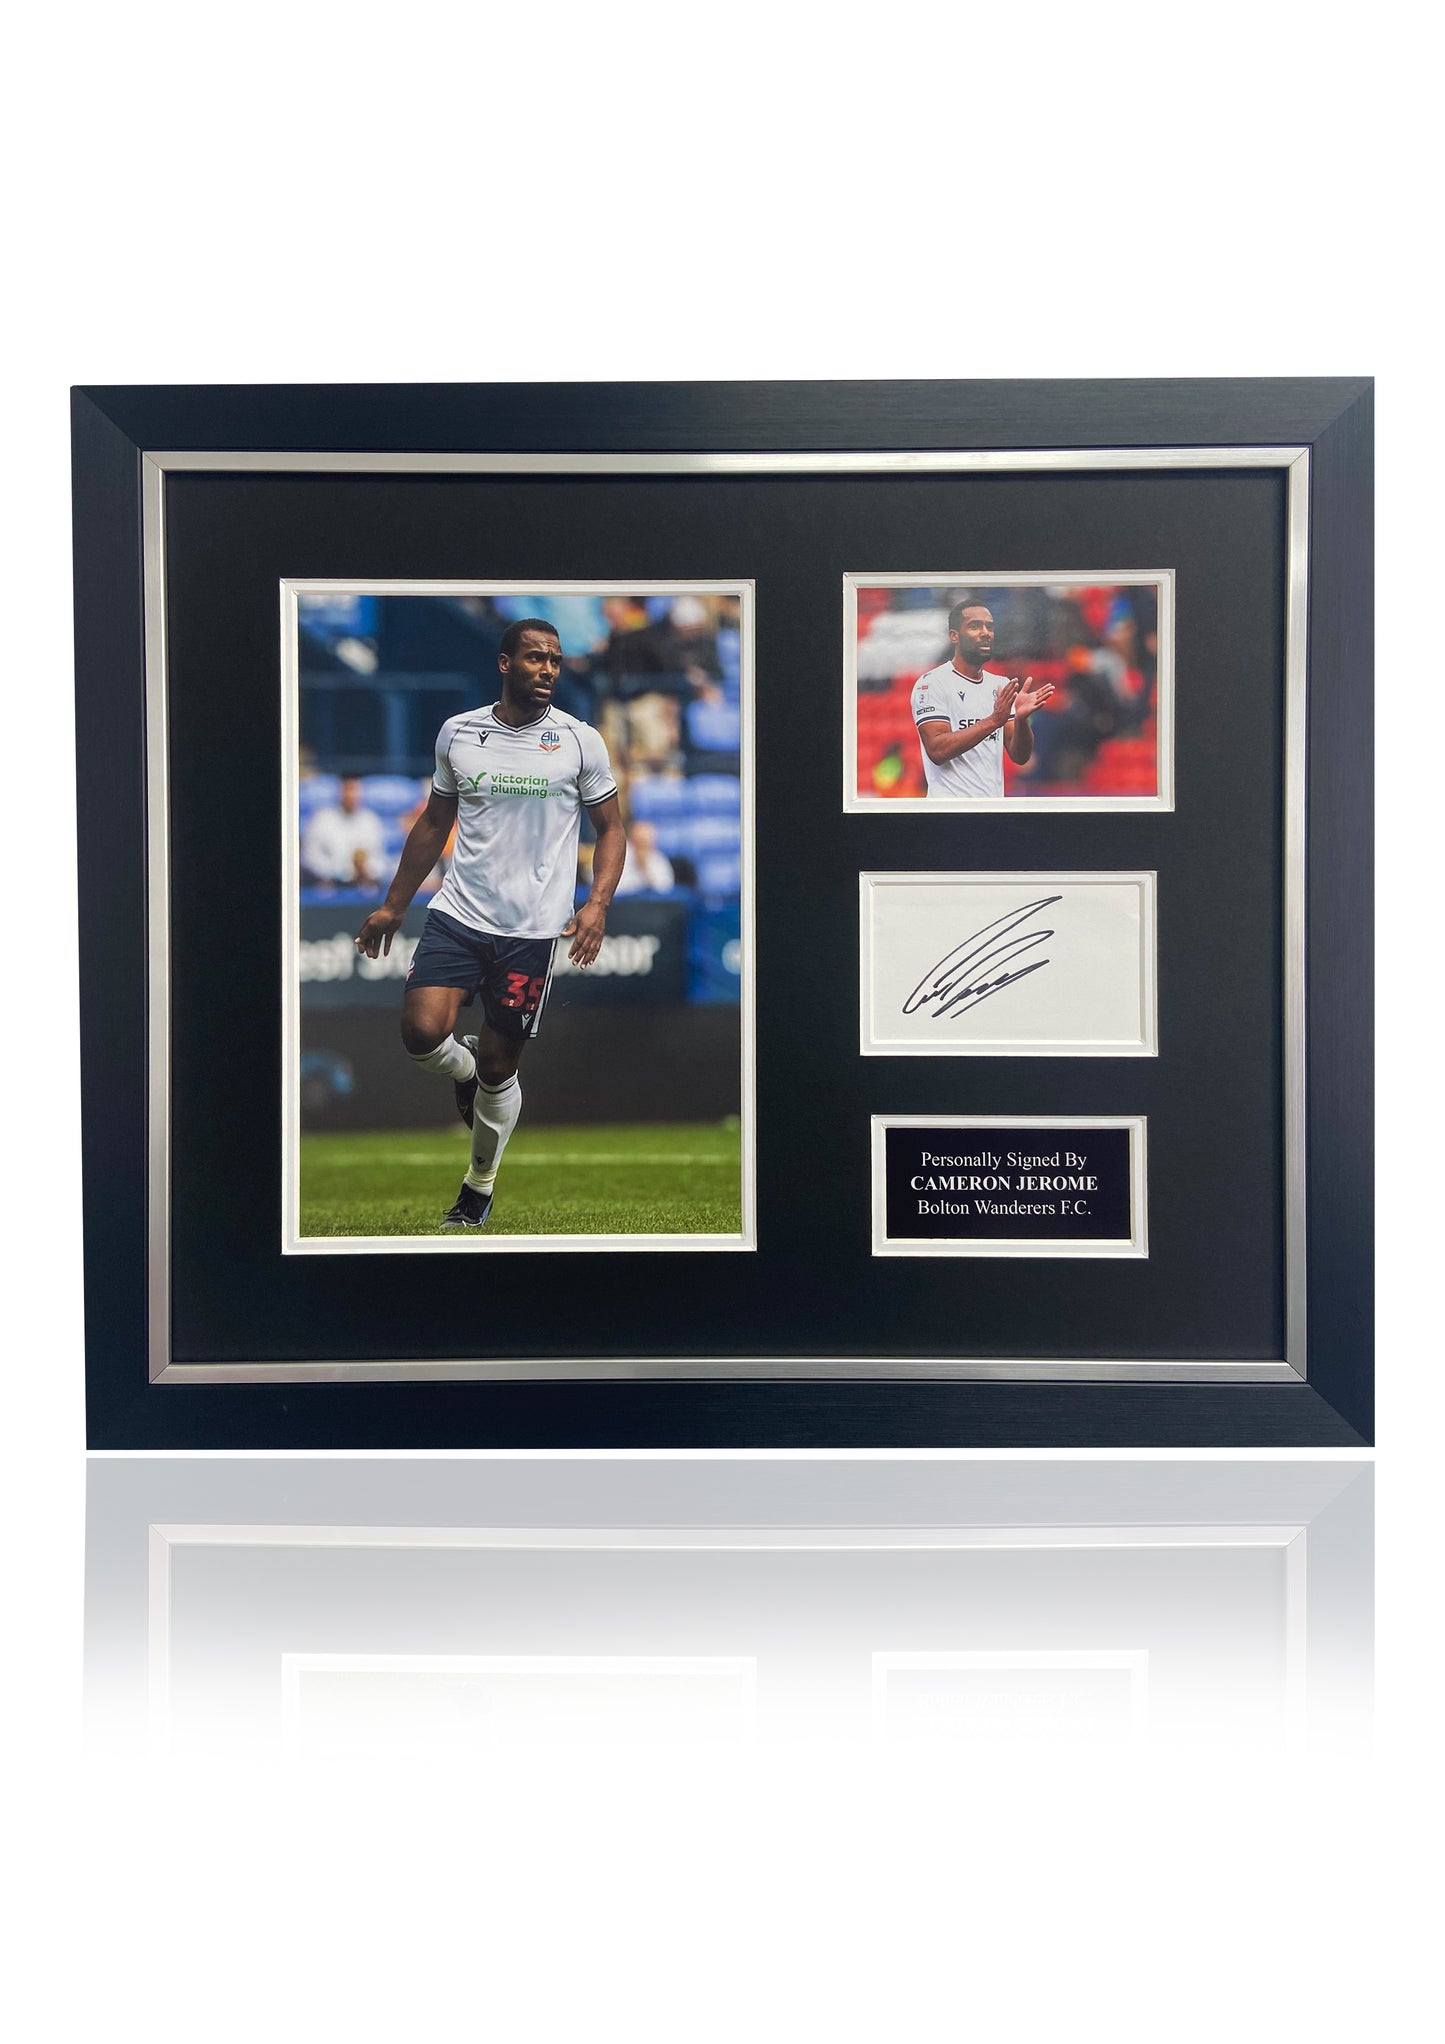 Cameron Jerome Bolton Wanderers F.C. hand signed photo card montage BWFC